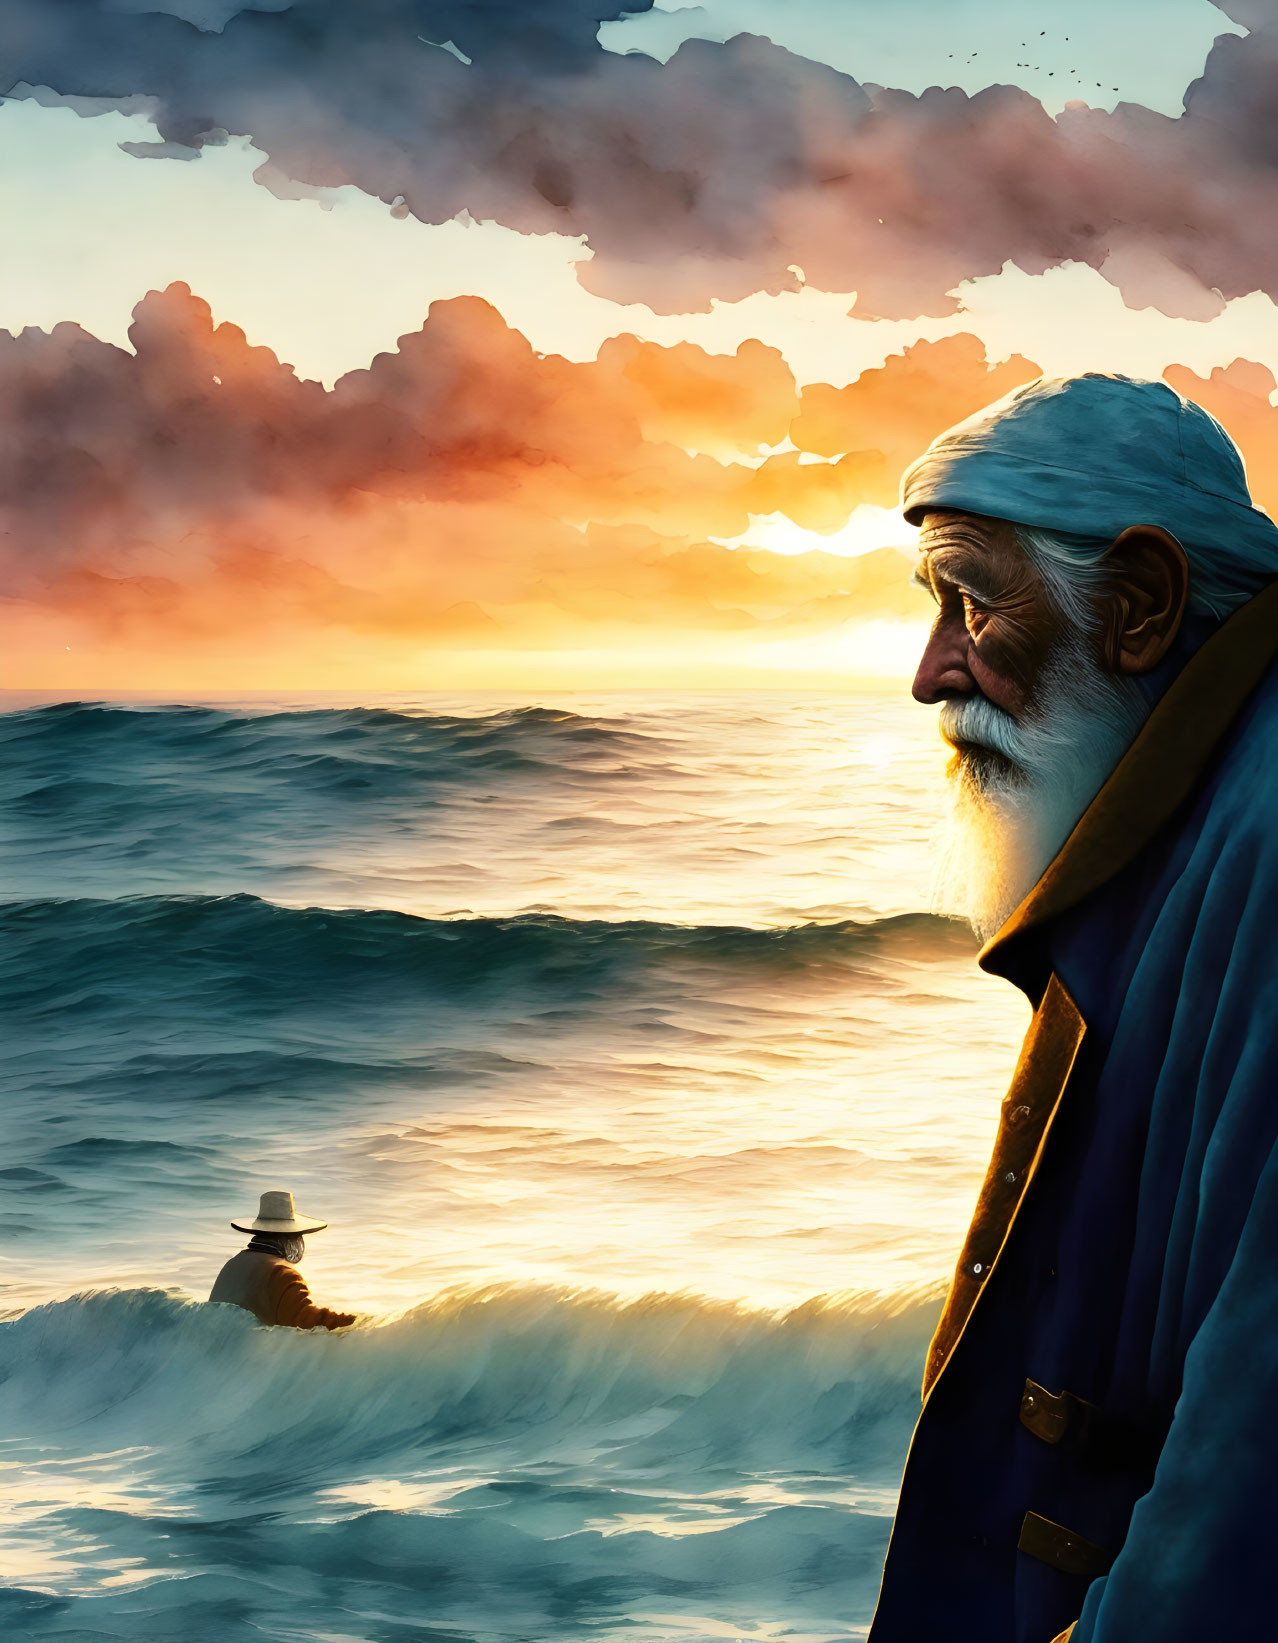 Elderly seafarer admiring sunset with small boat in background